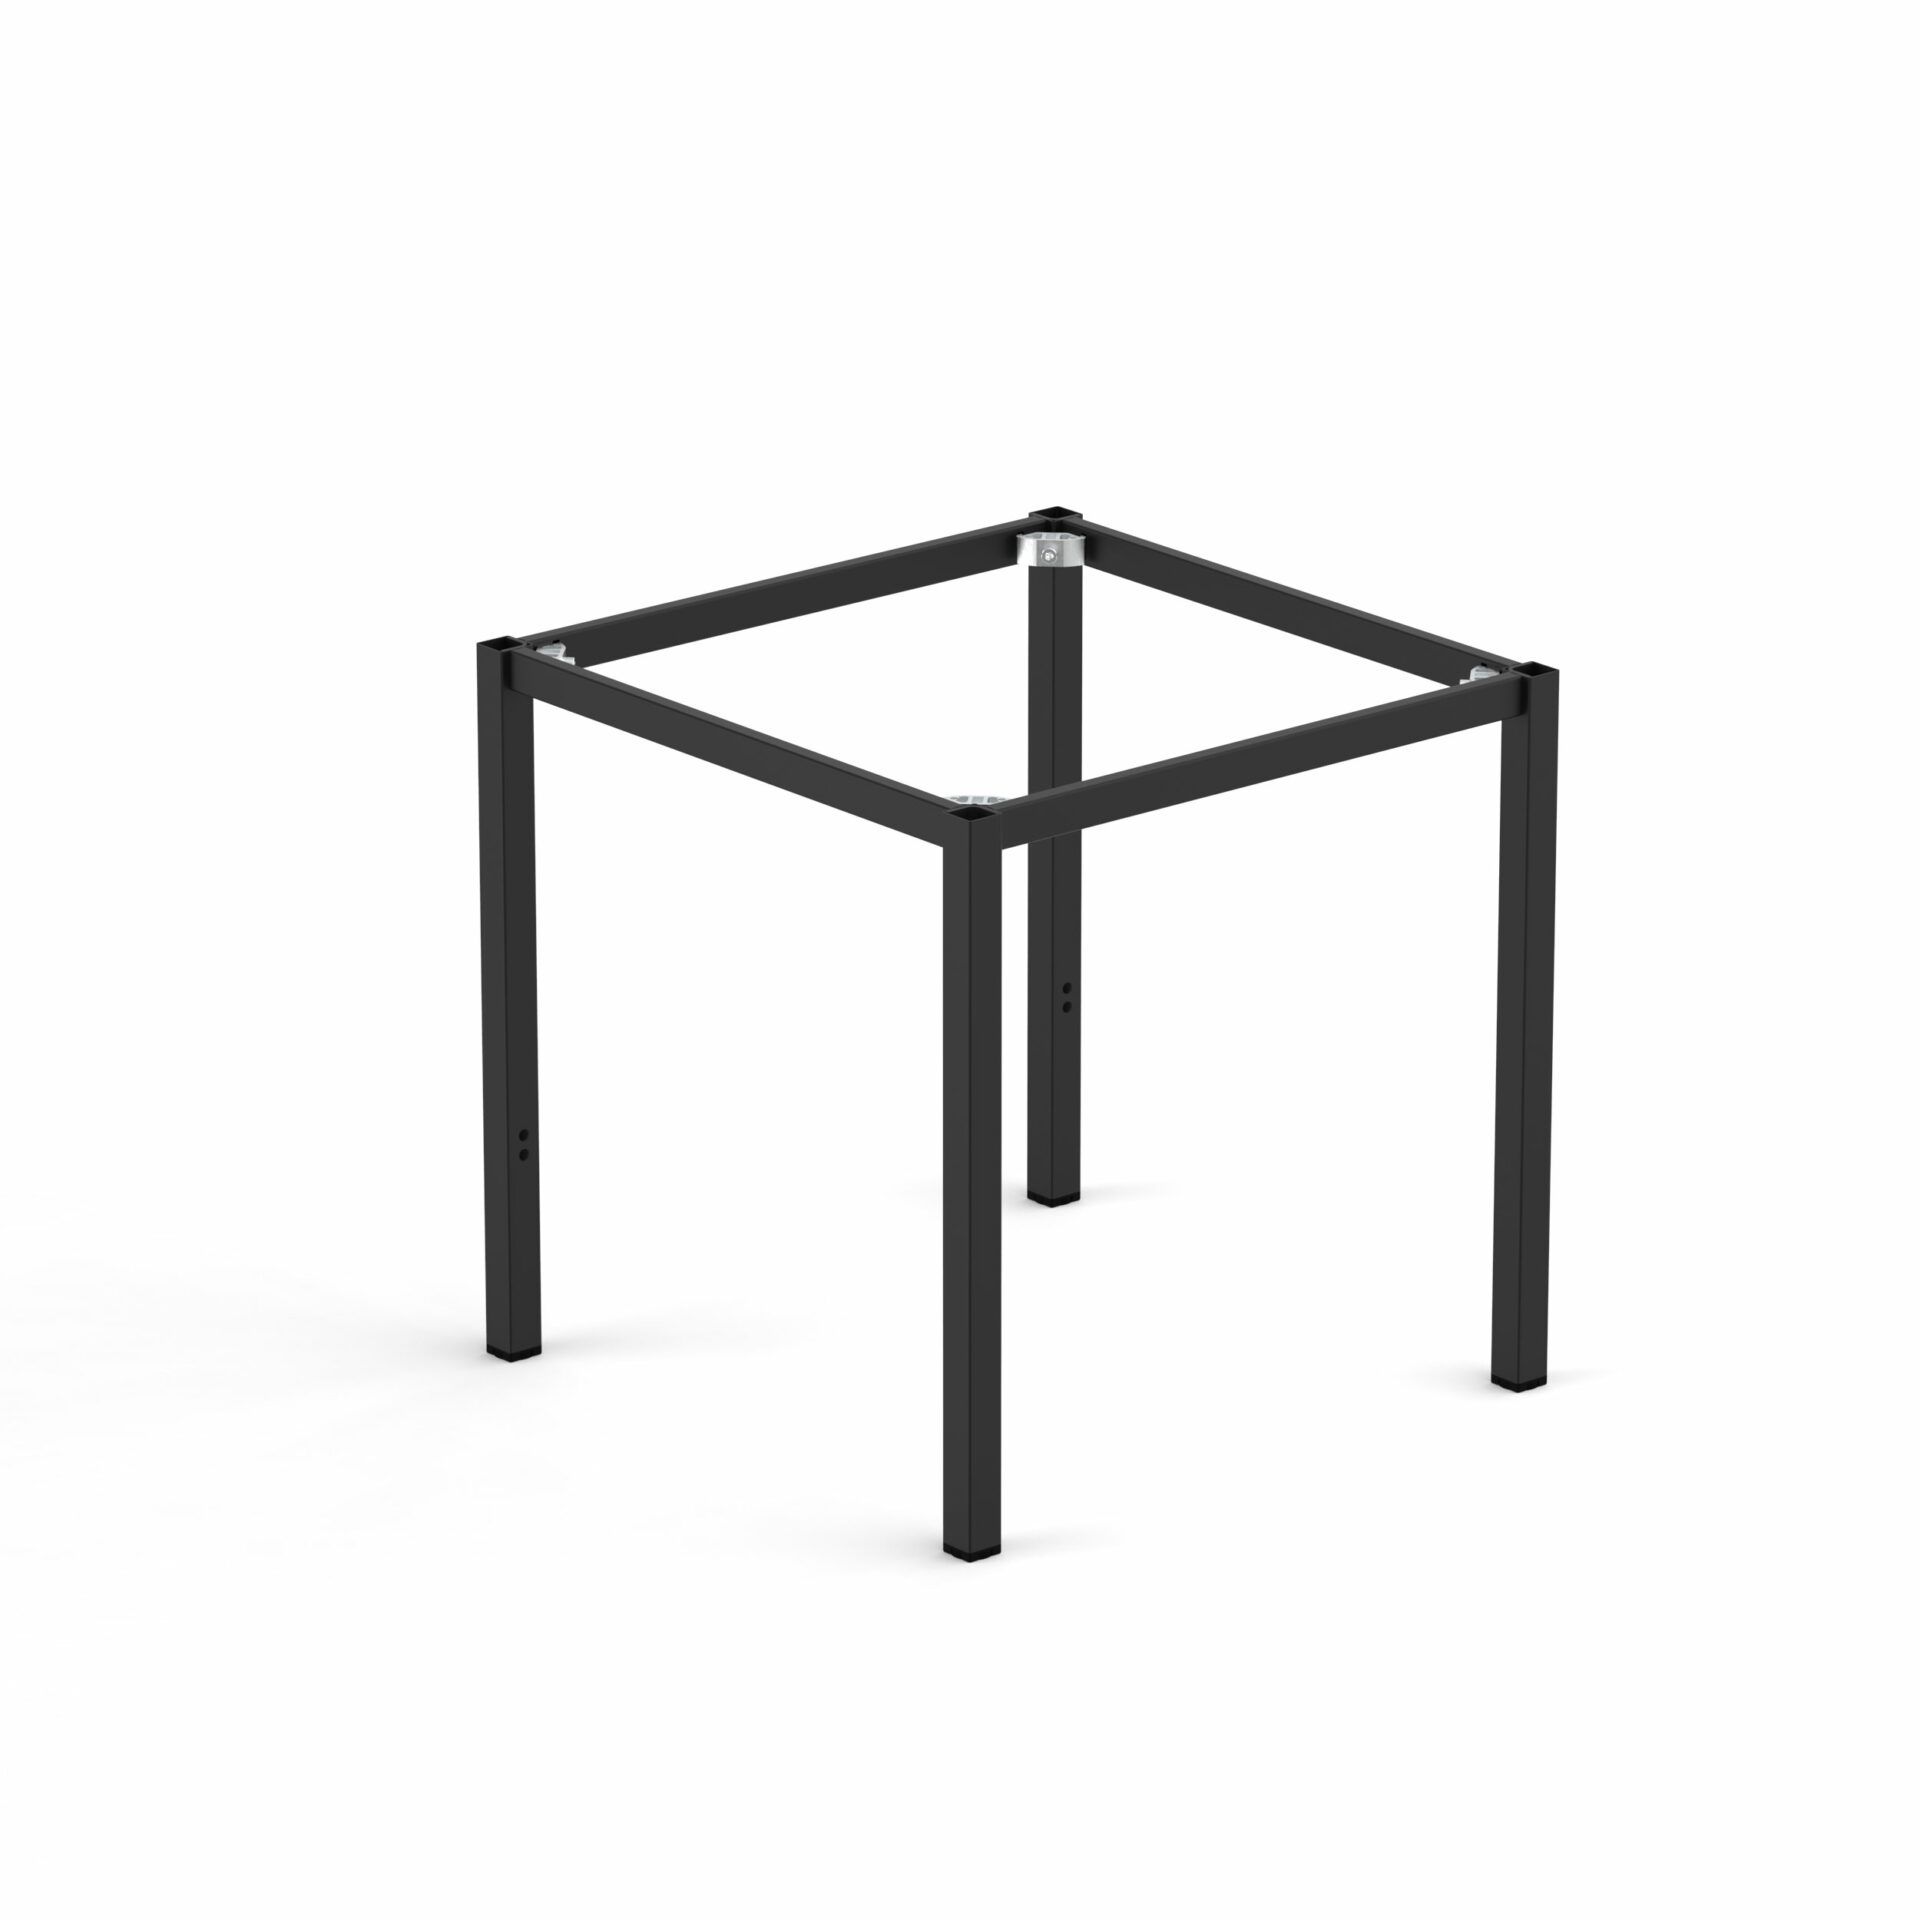 Spire Square leg Table Height Frame 740 x 690 x 720H